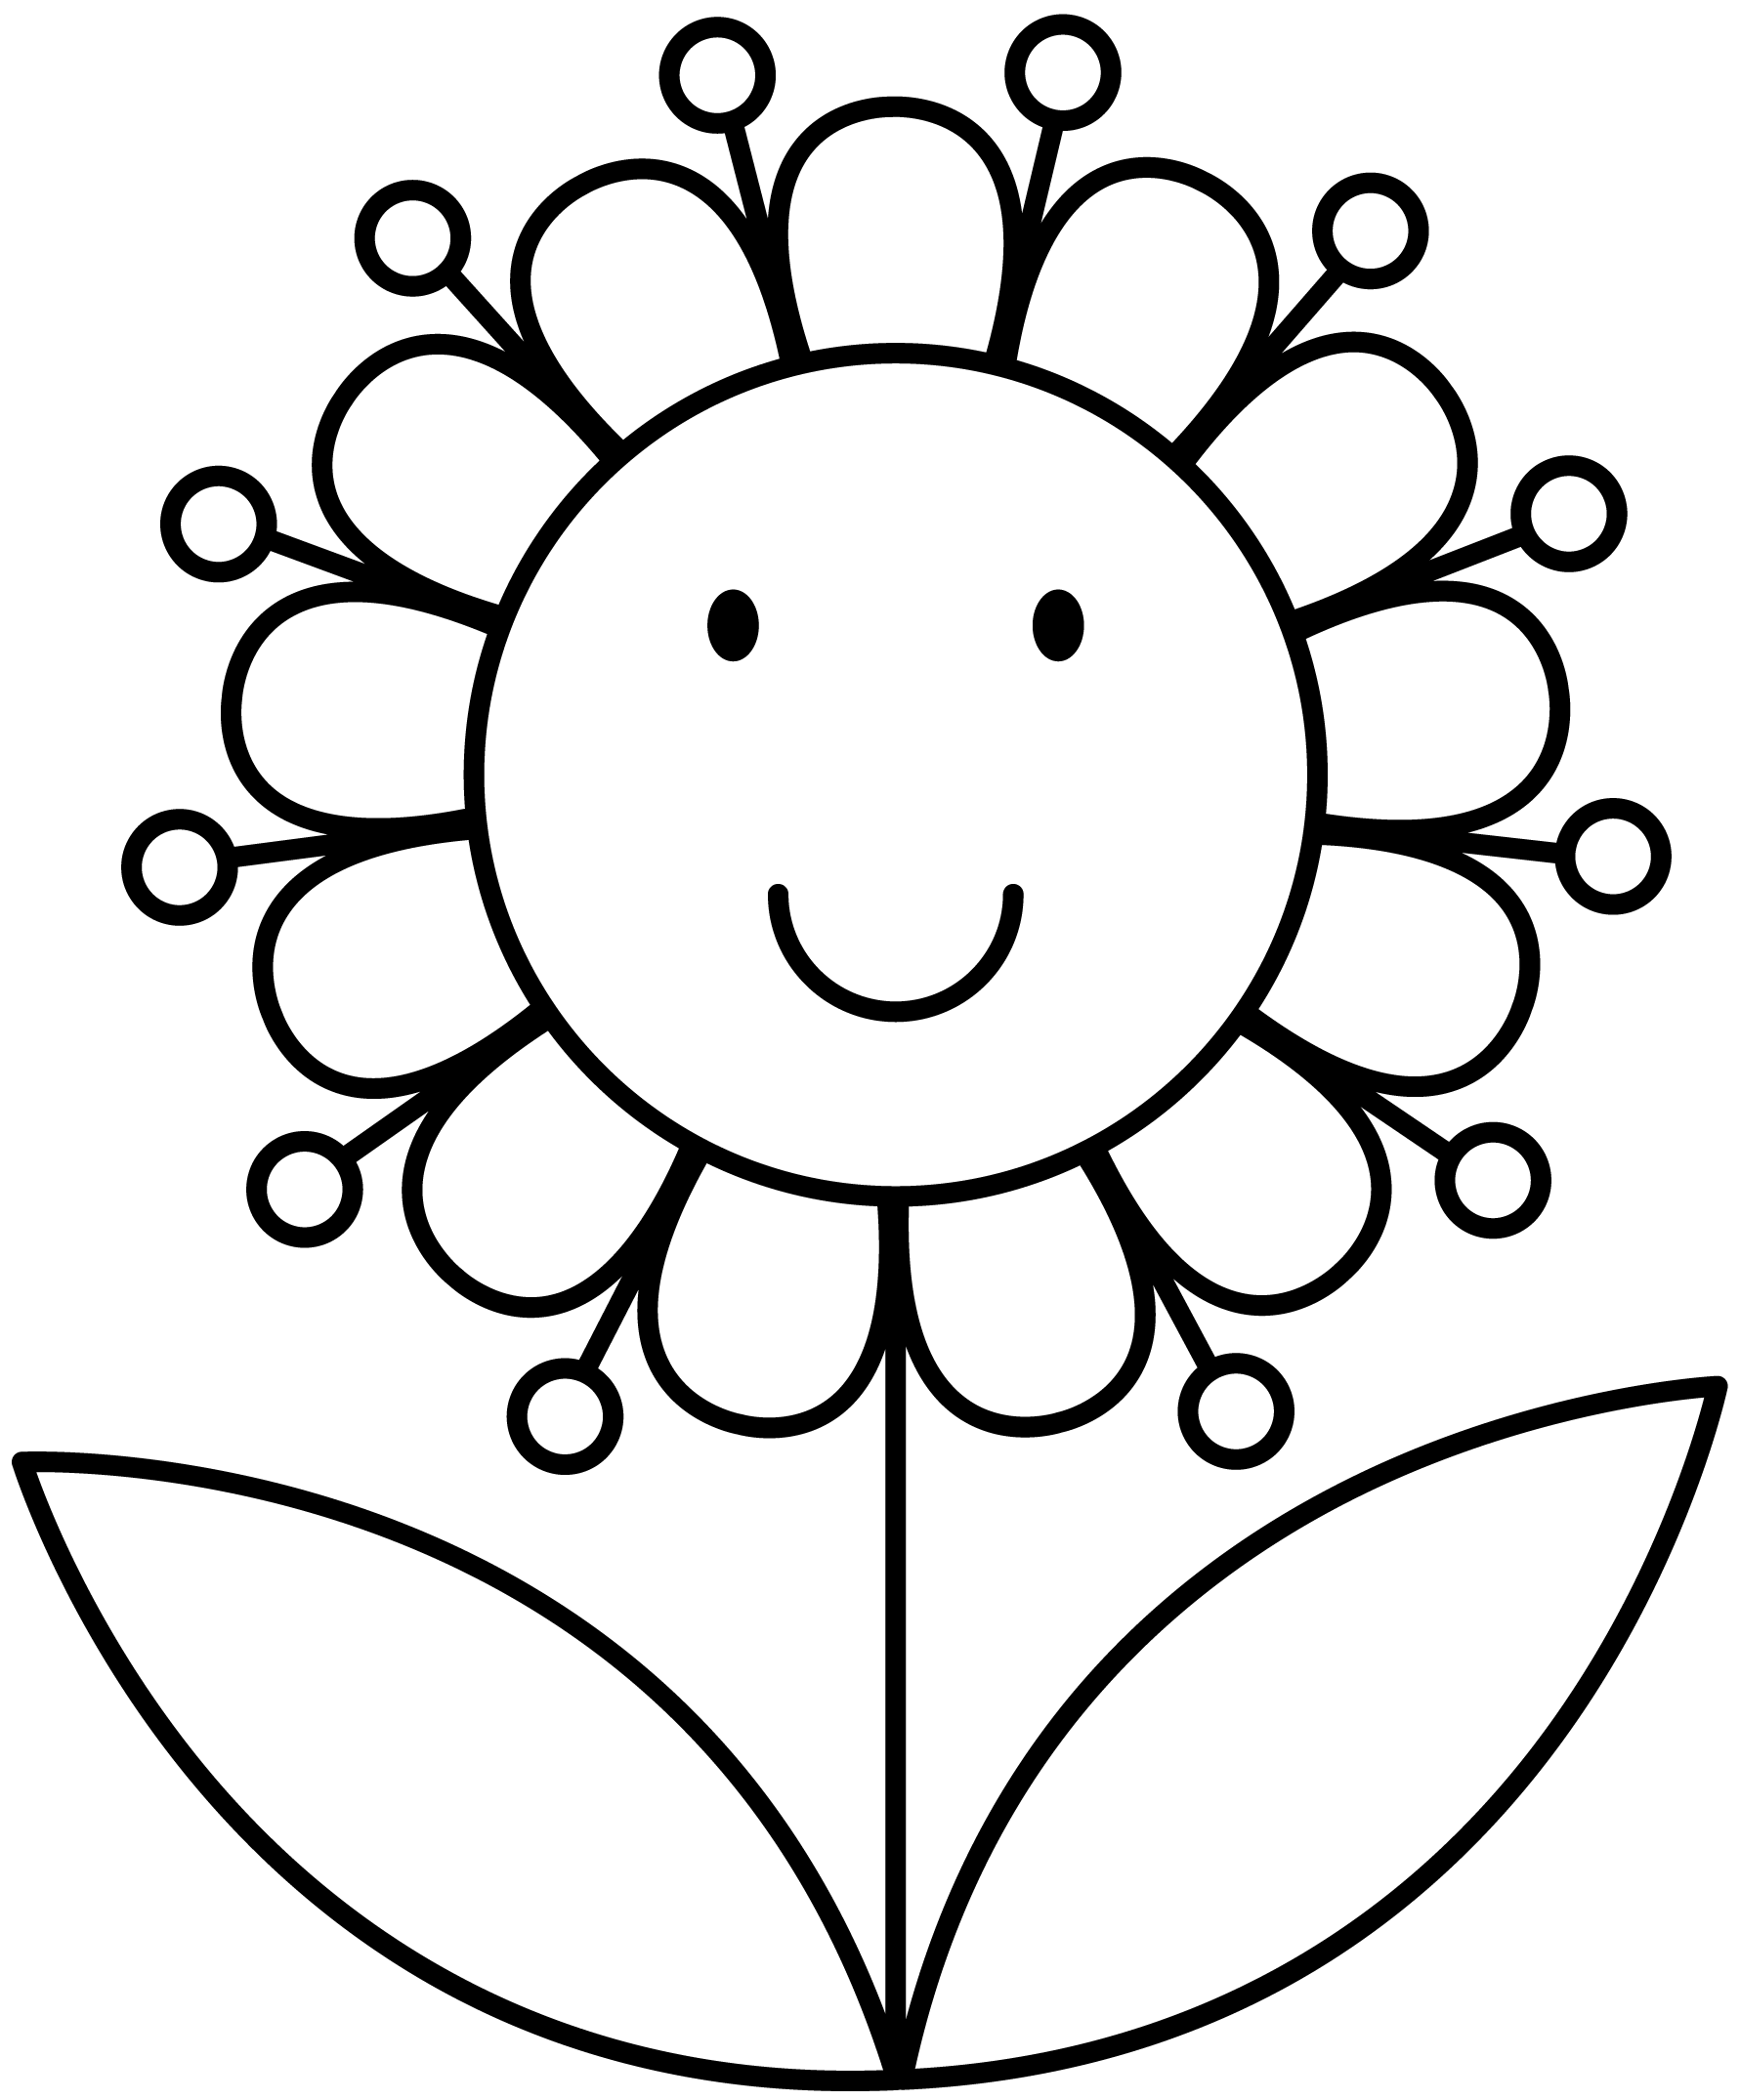 Flower flower coloring pages printable flower coloring pages spring coloring pages